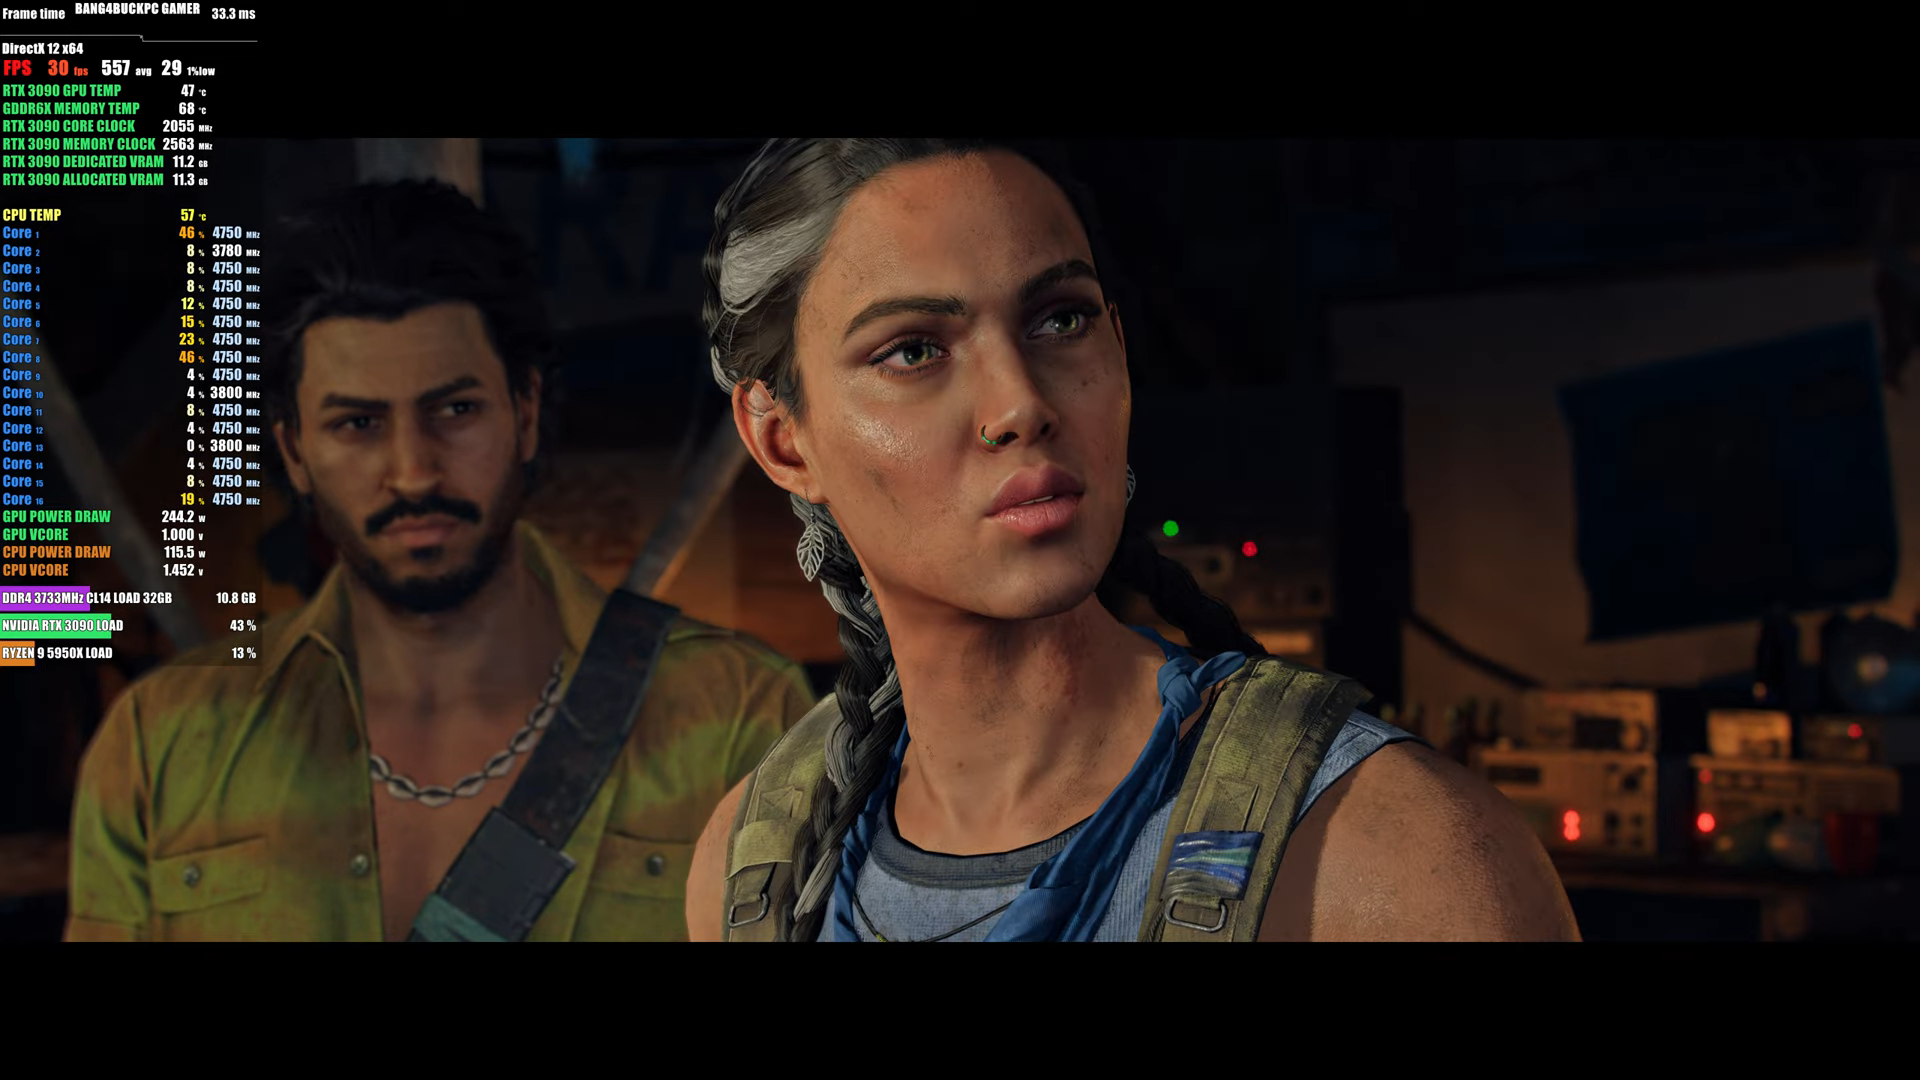 Media asset in full size related to 3dfxzone.it news item entitled as follows: Far Cry 6 | 4K Gameplay | GeForce RTX 3090 vs Radeon RX 6900 XT | Image Name: news32556_Far-Cry-6_GeForce-RTX-3090_Screenshot_2.png